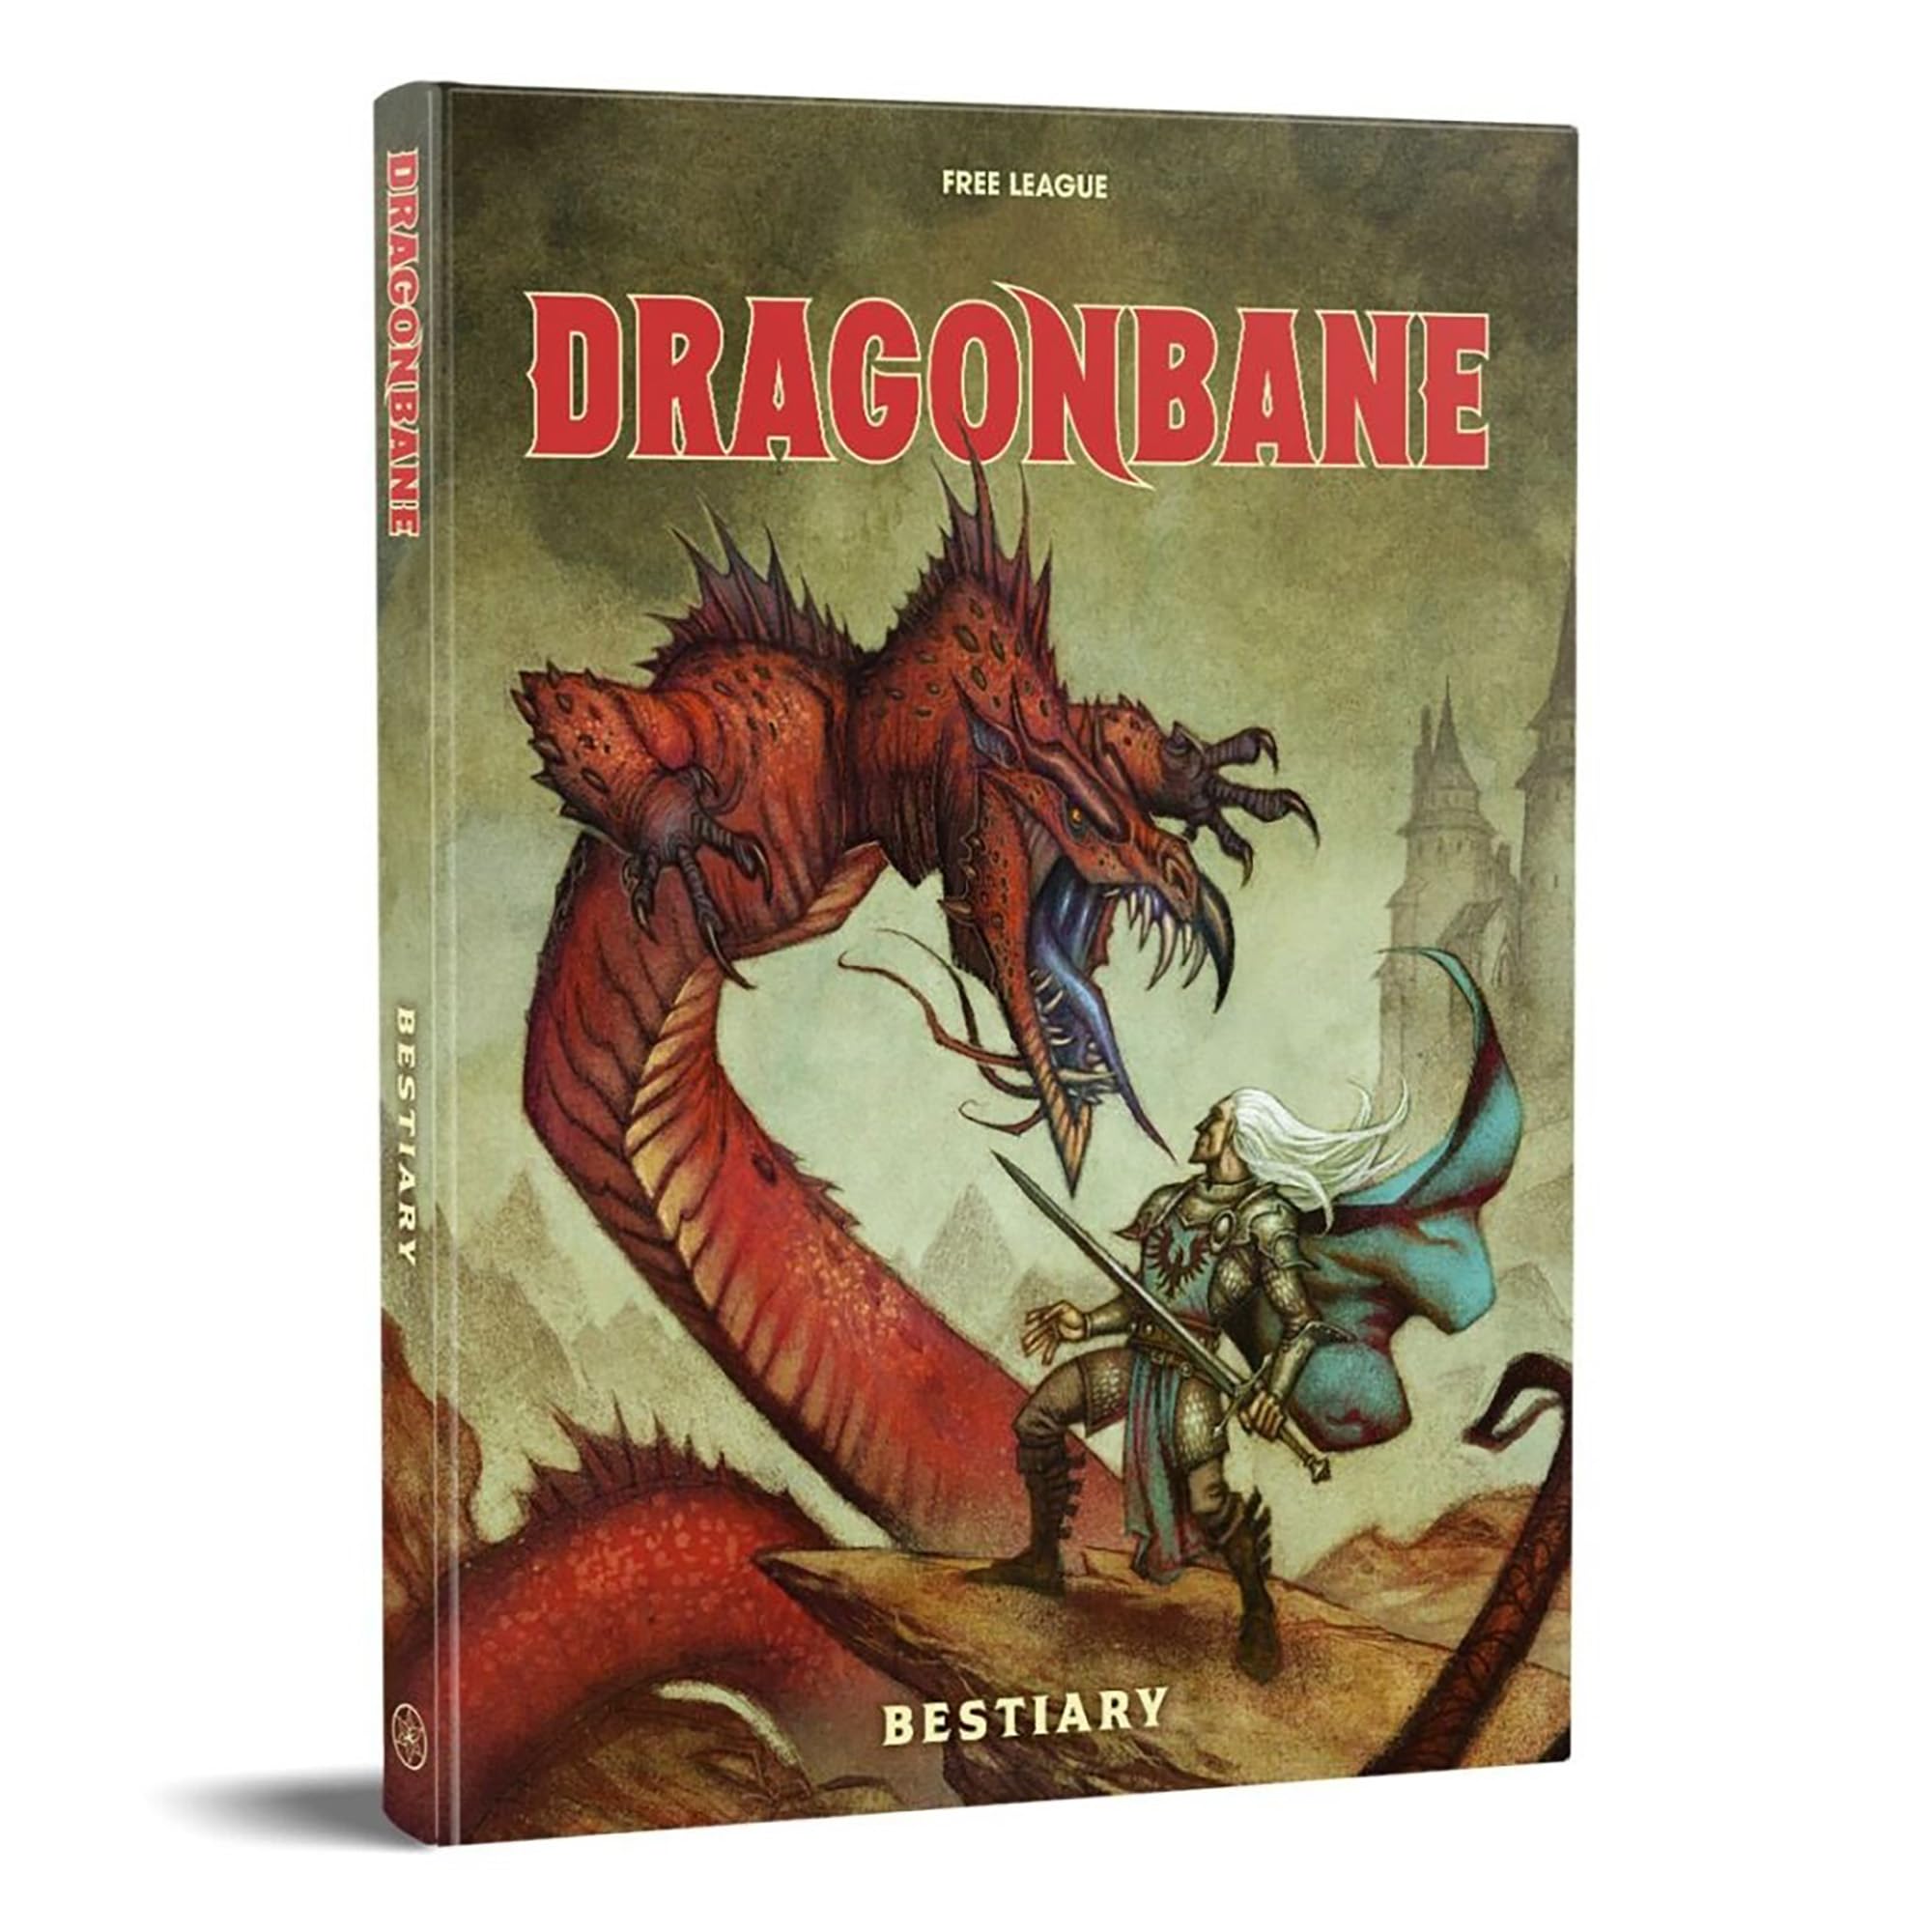 Free League Publishing: Dragonbane: Bestiary - Hardcover RPG Supplement Book, Information for 63 Fantasy Creatures & Monsters, Full-Color Illustration